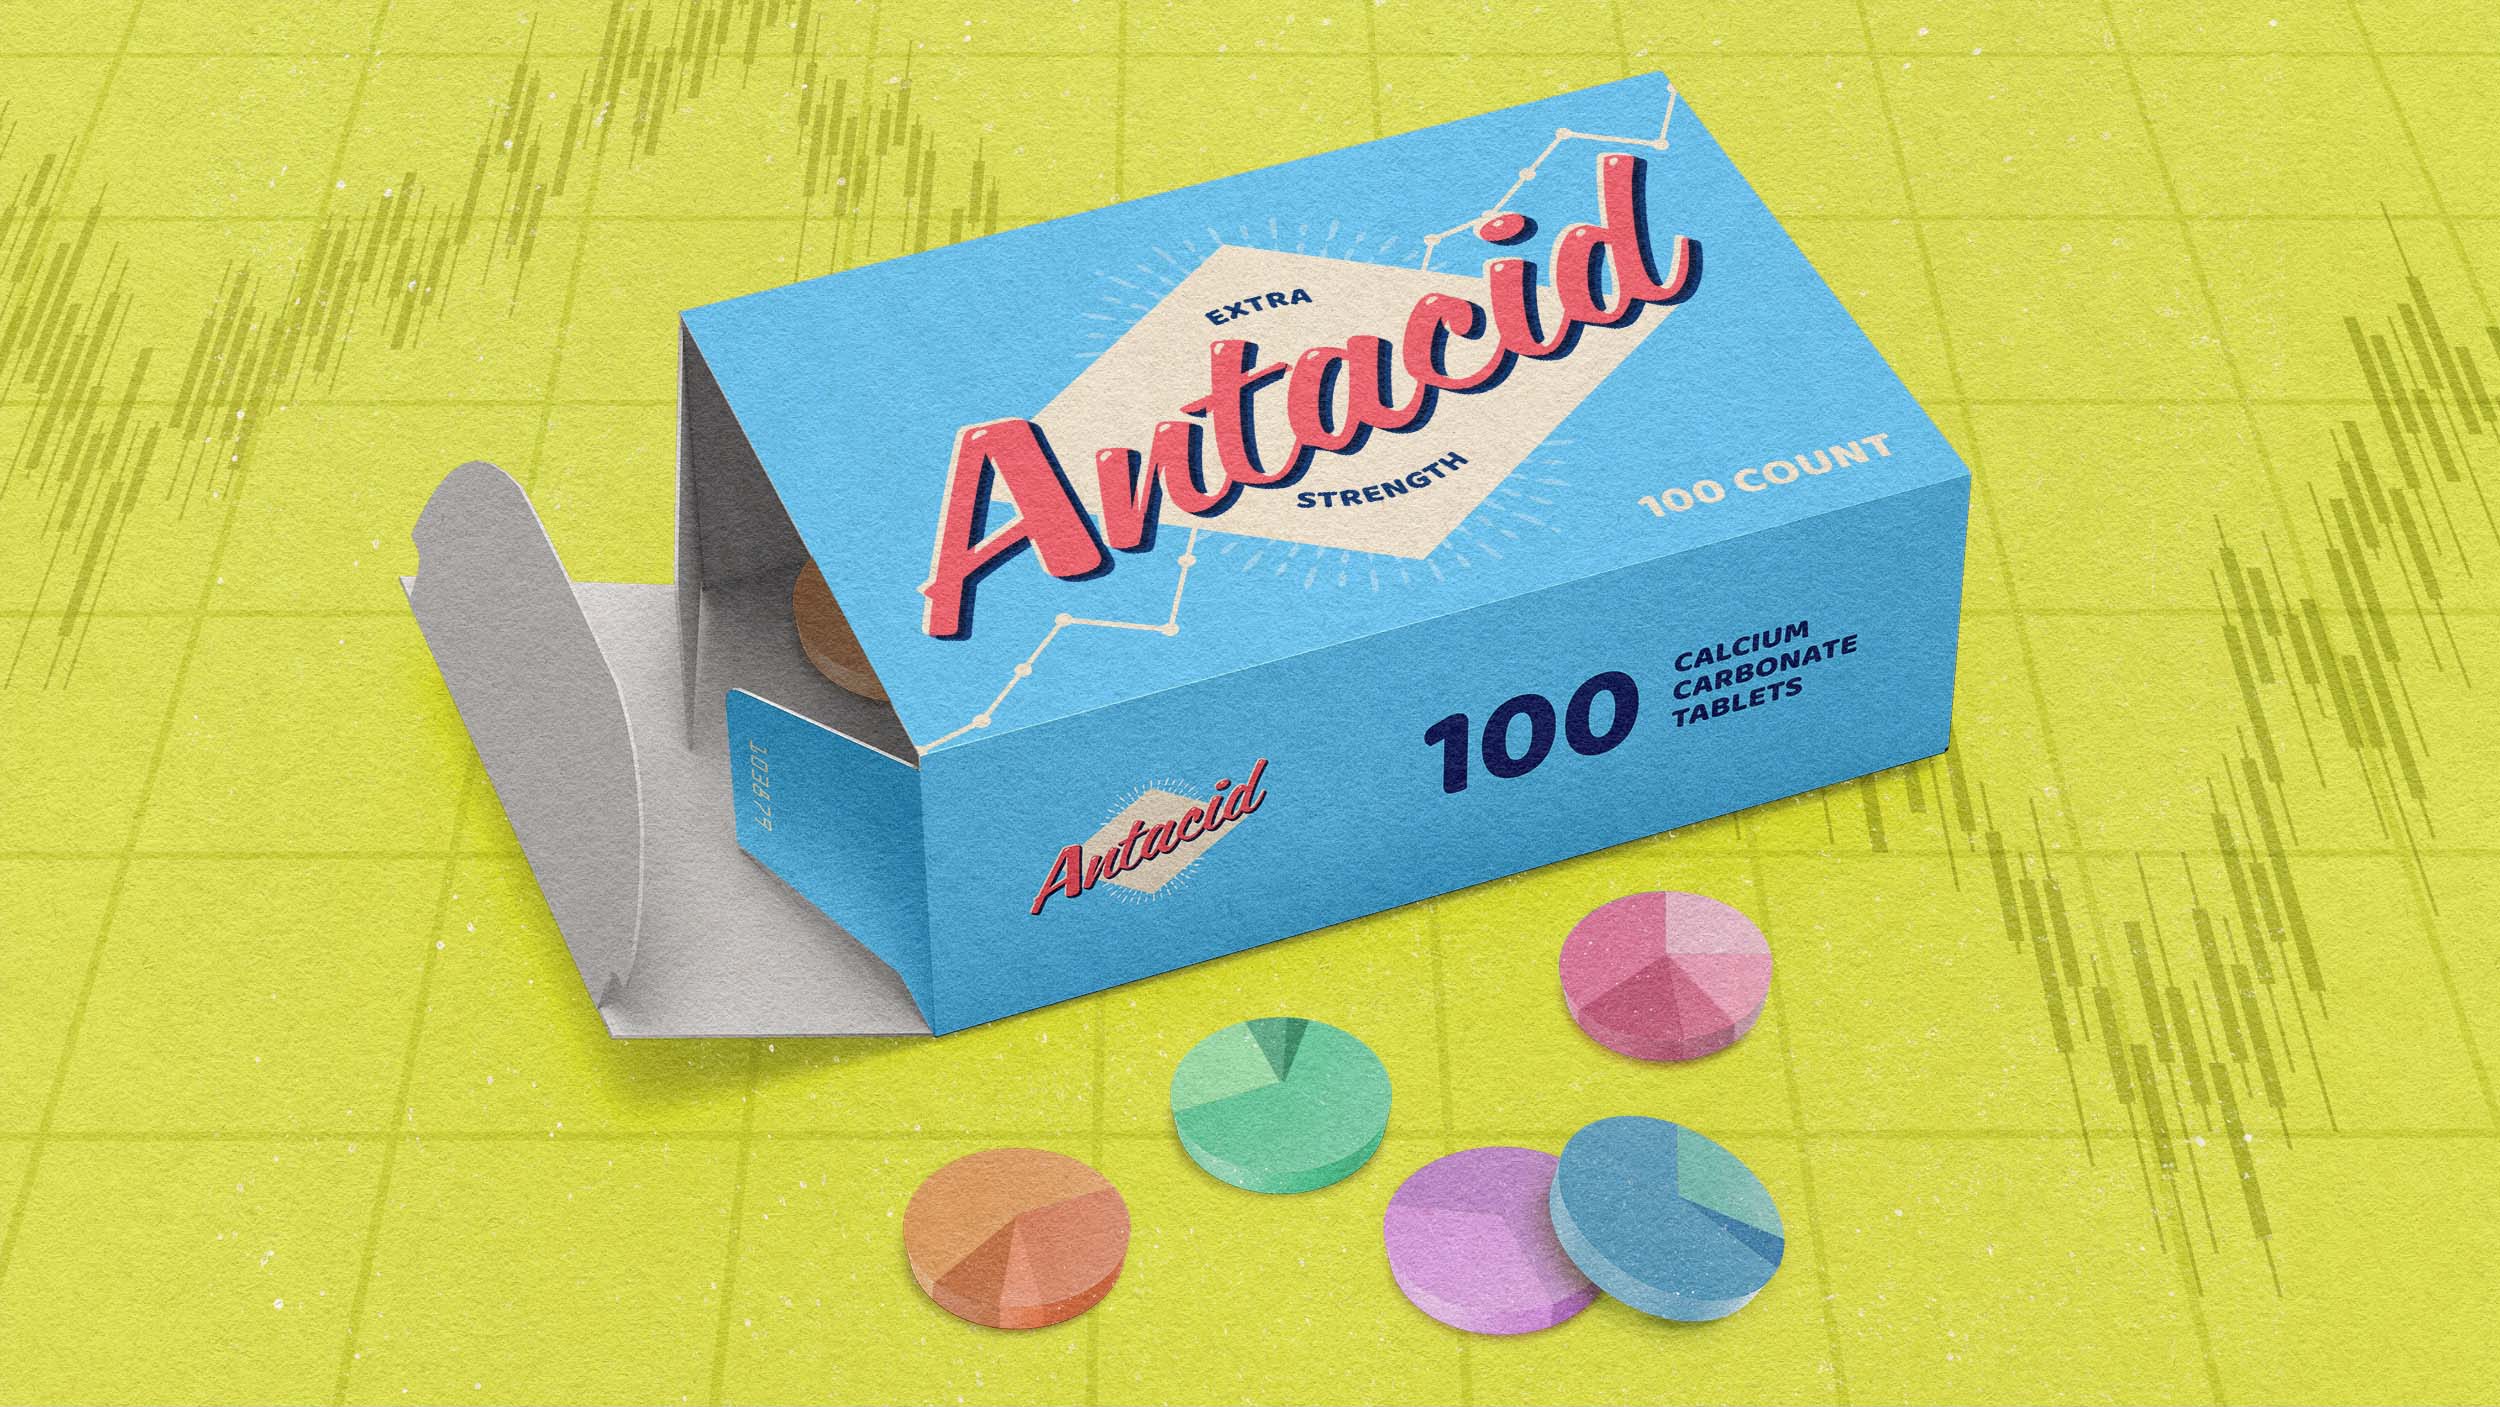 Illustration of a box of antacids, surrounded by pills that look like pie charts, on a stock market background.